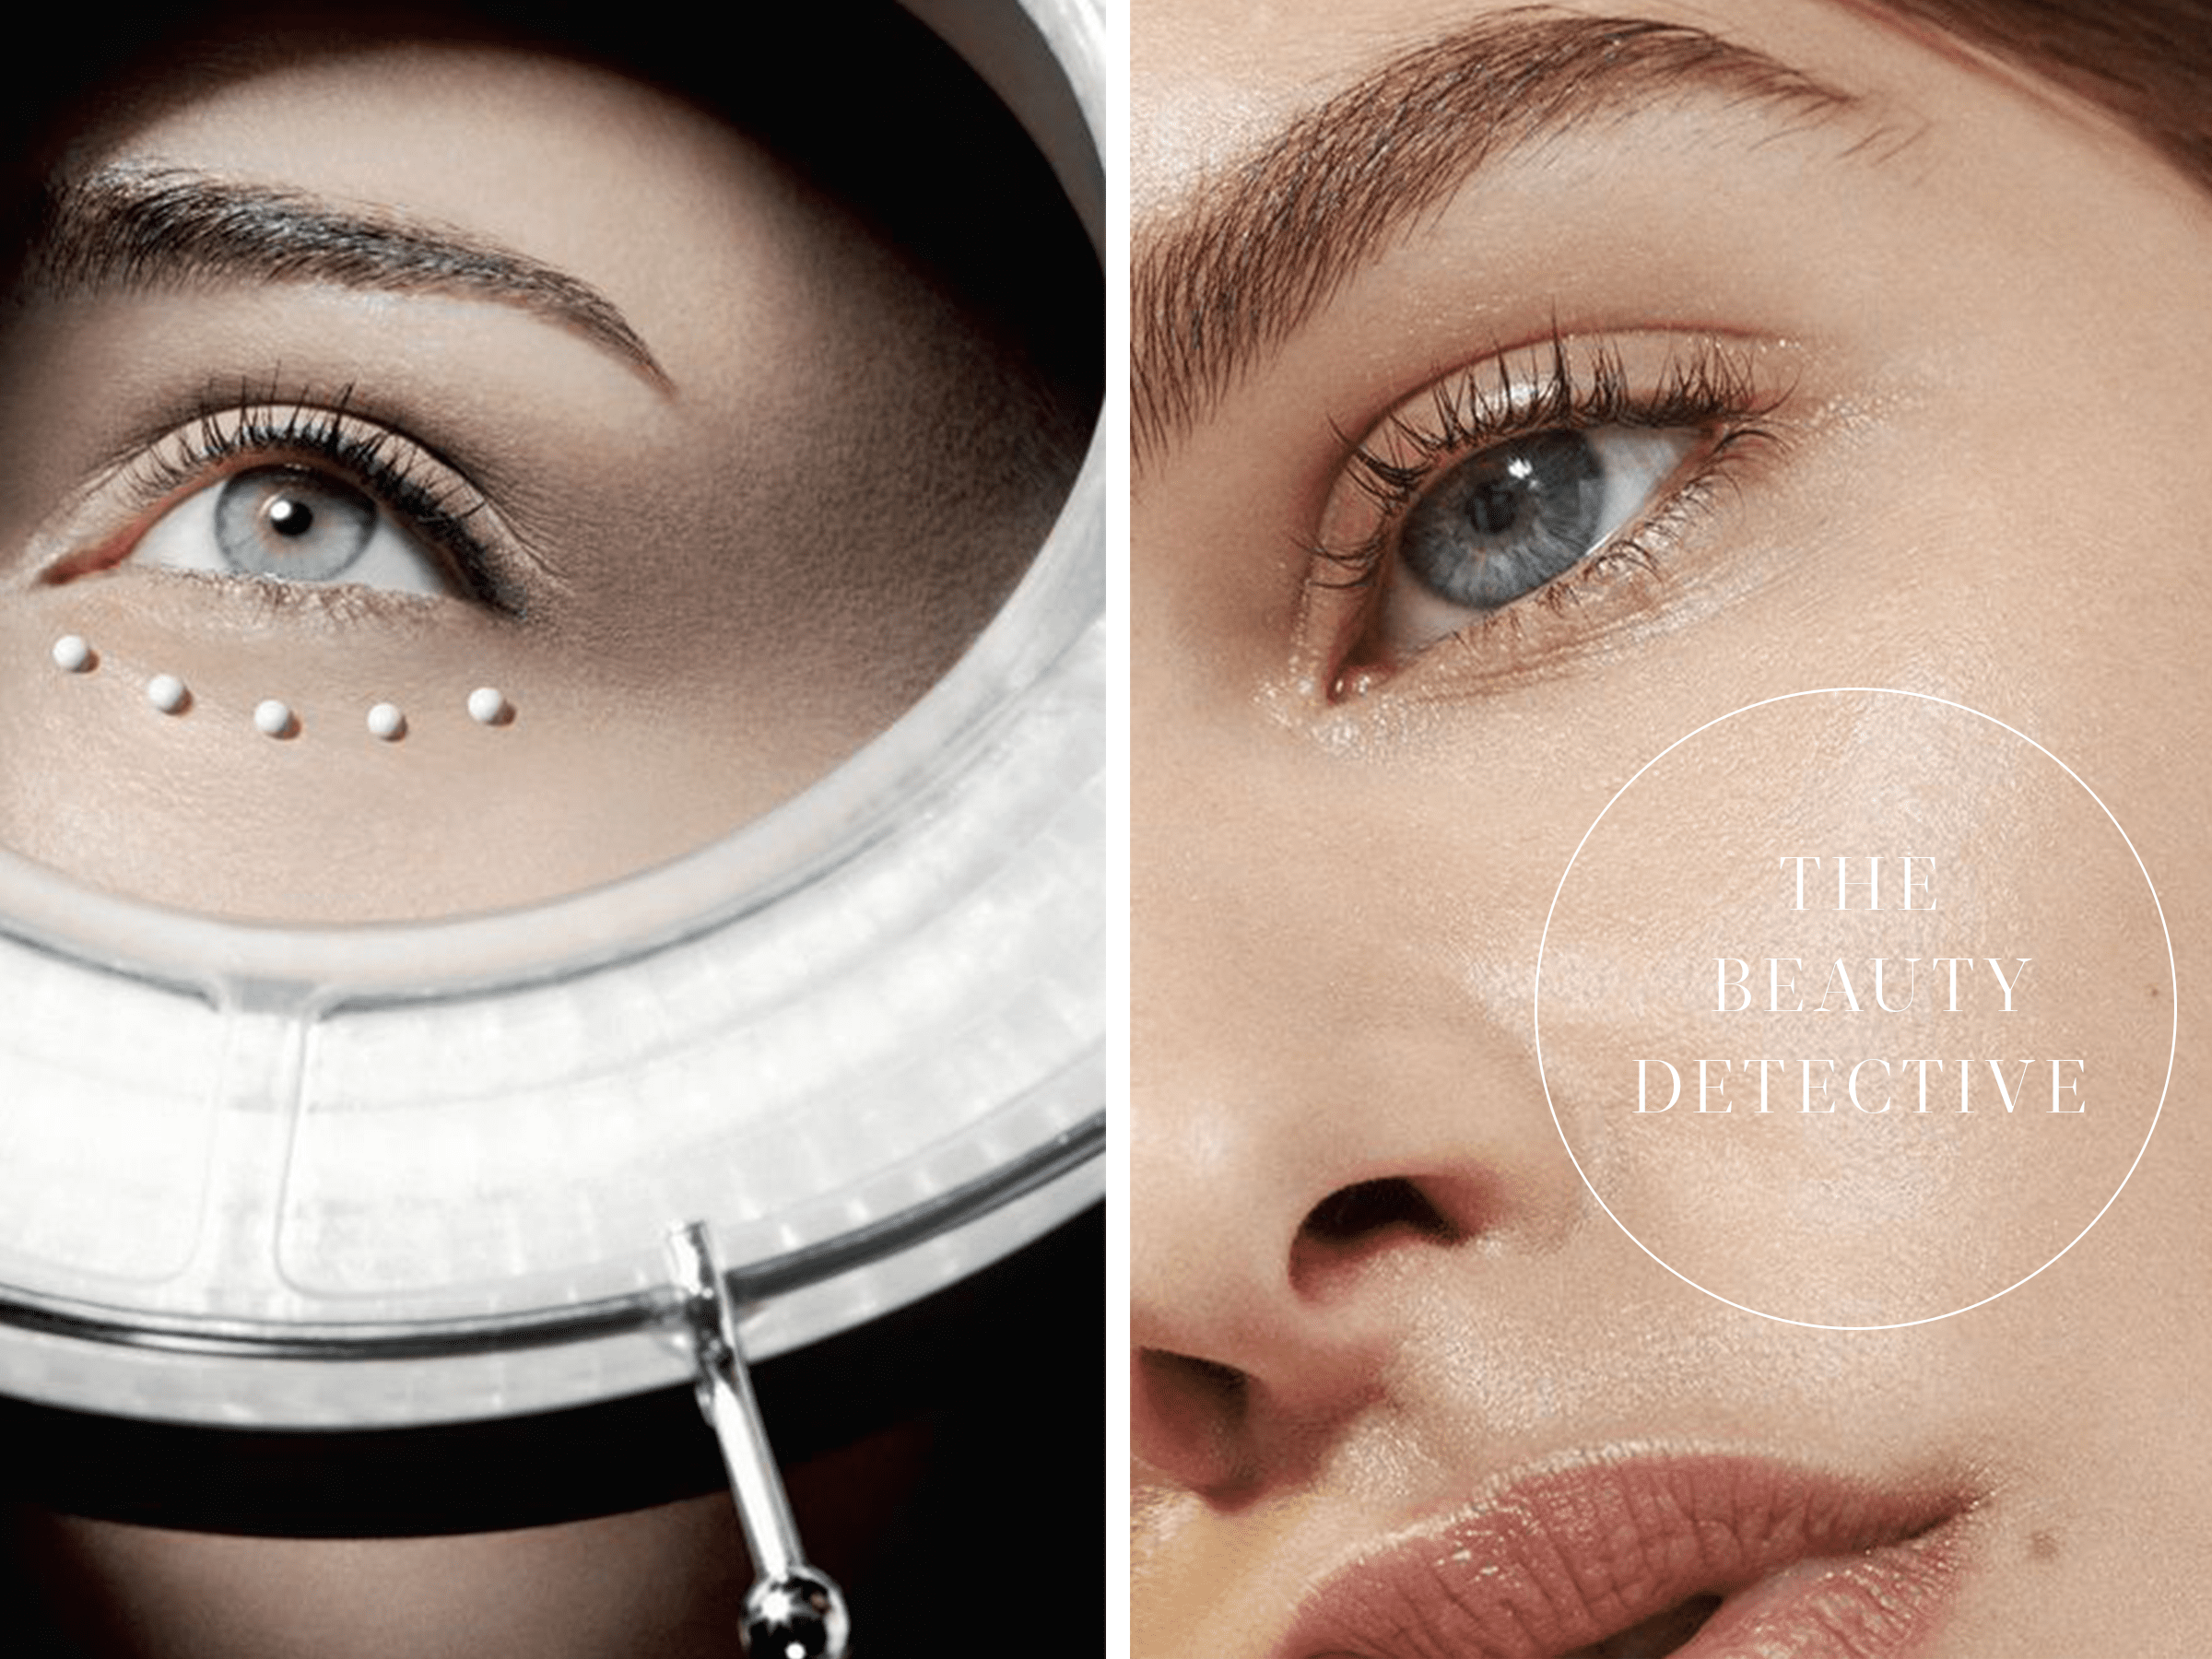 Beauty Detective: The Do?s + Don?t?s of Eye Cream